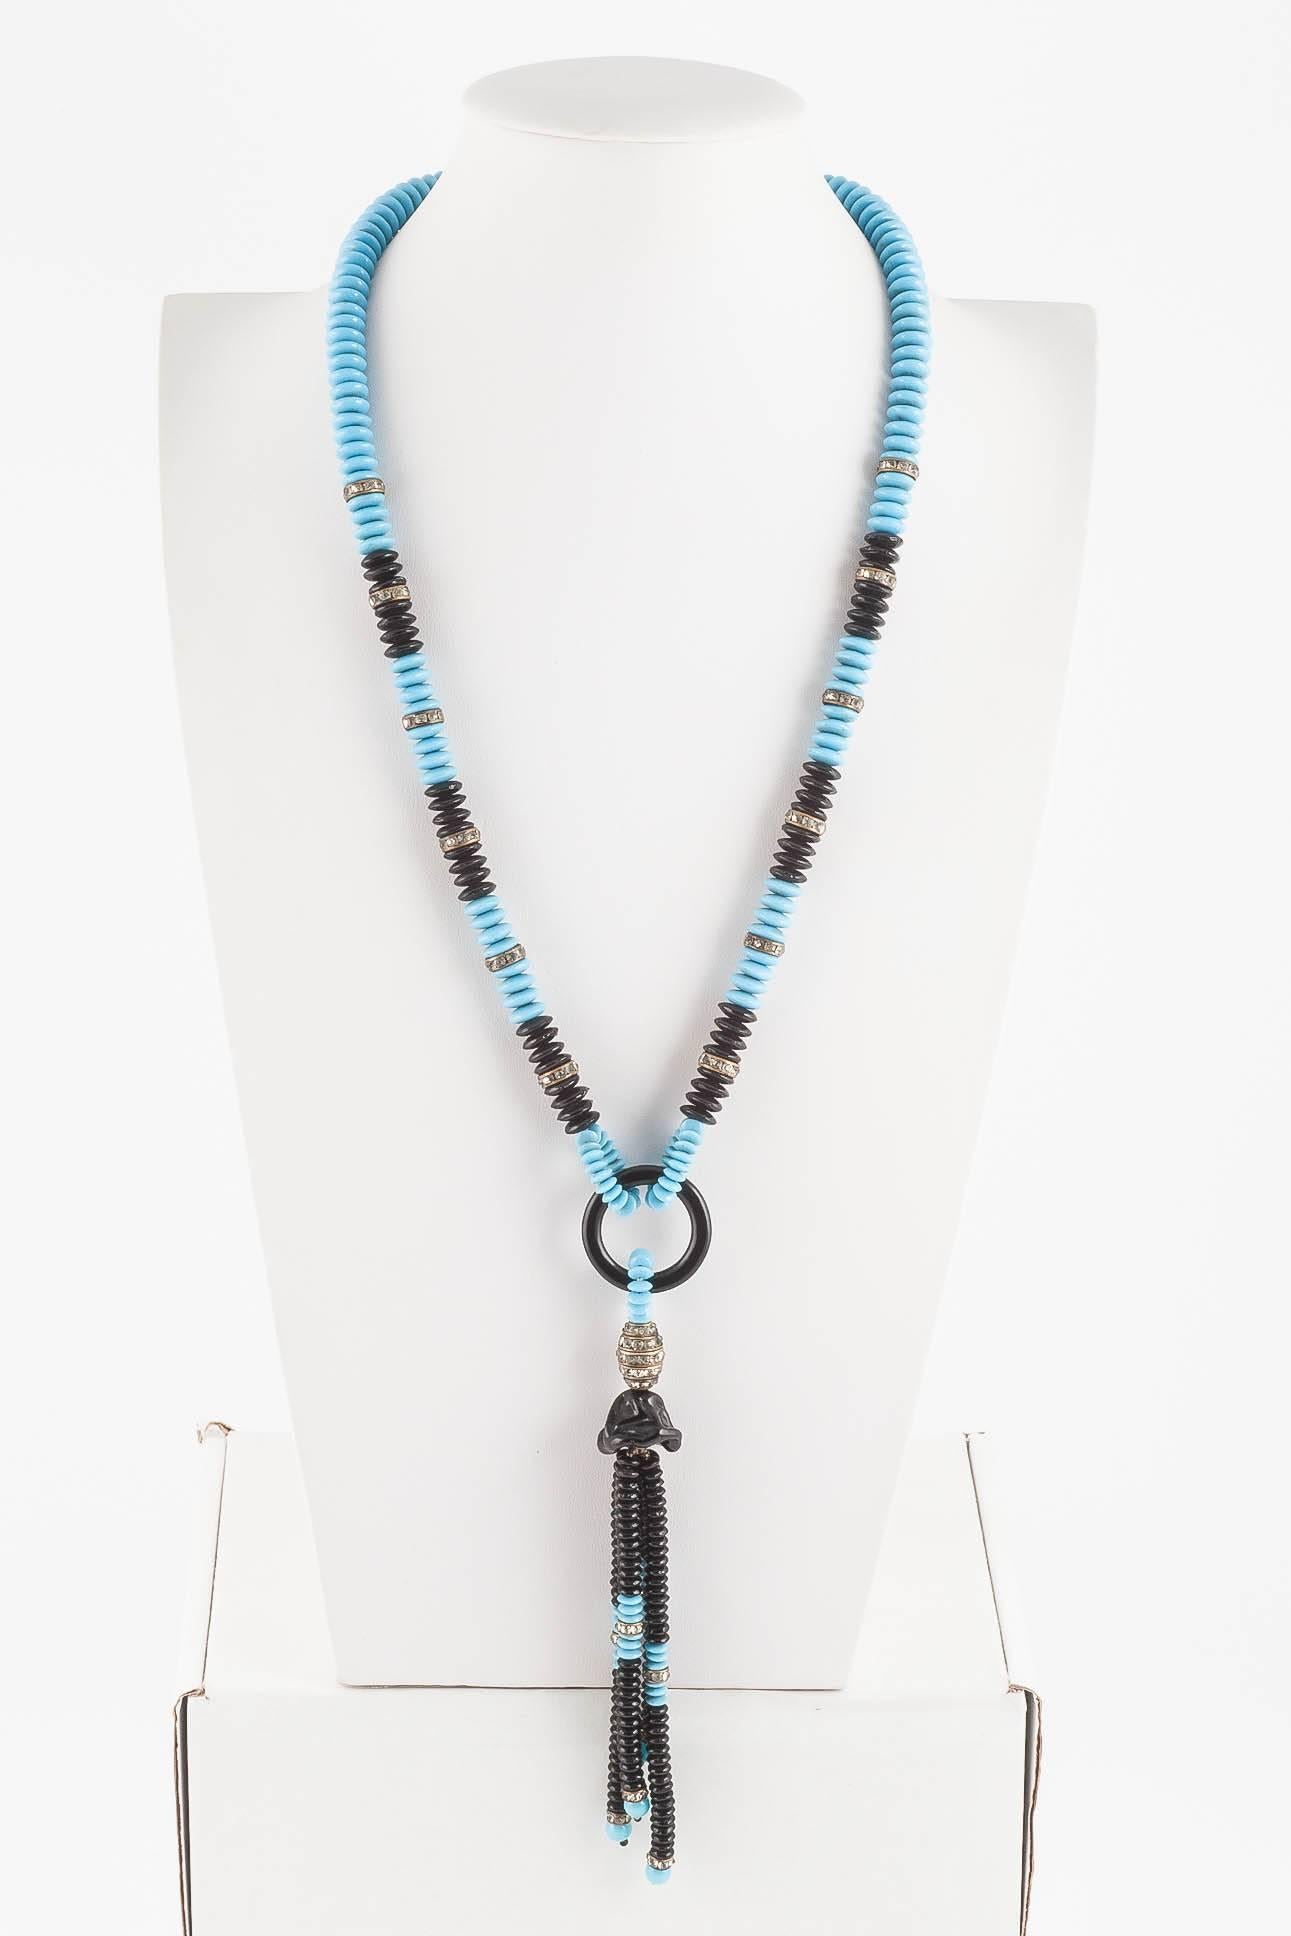 Lovely turquoise and black glass 'donut' bead sautoir necklace, with a tassle, dropping from a faceted back glass ring and moulded black glass 'bell', highly typical and stylish of this period. A paste oval 'ball' and interspersed paste rondelles